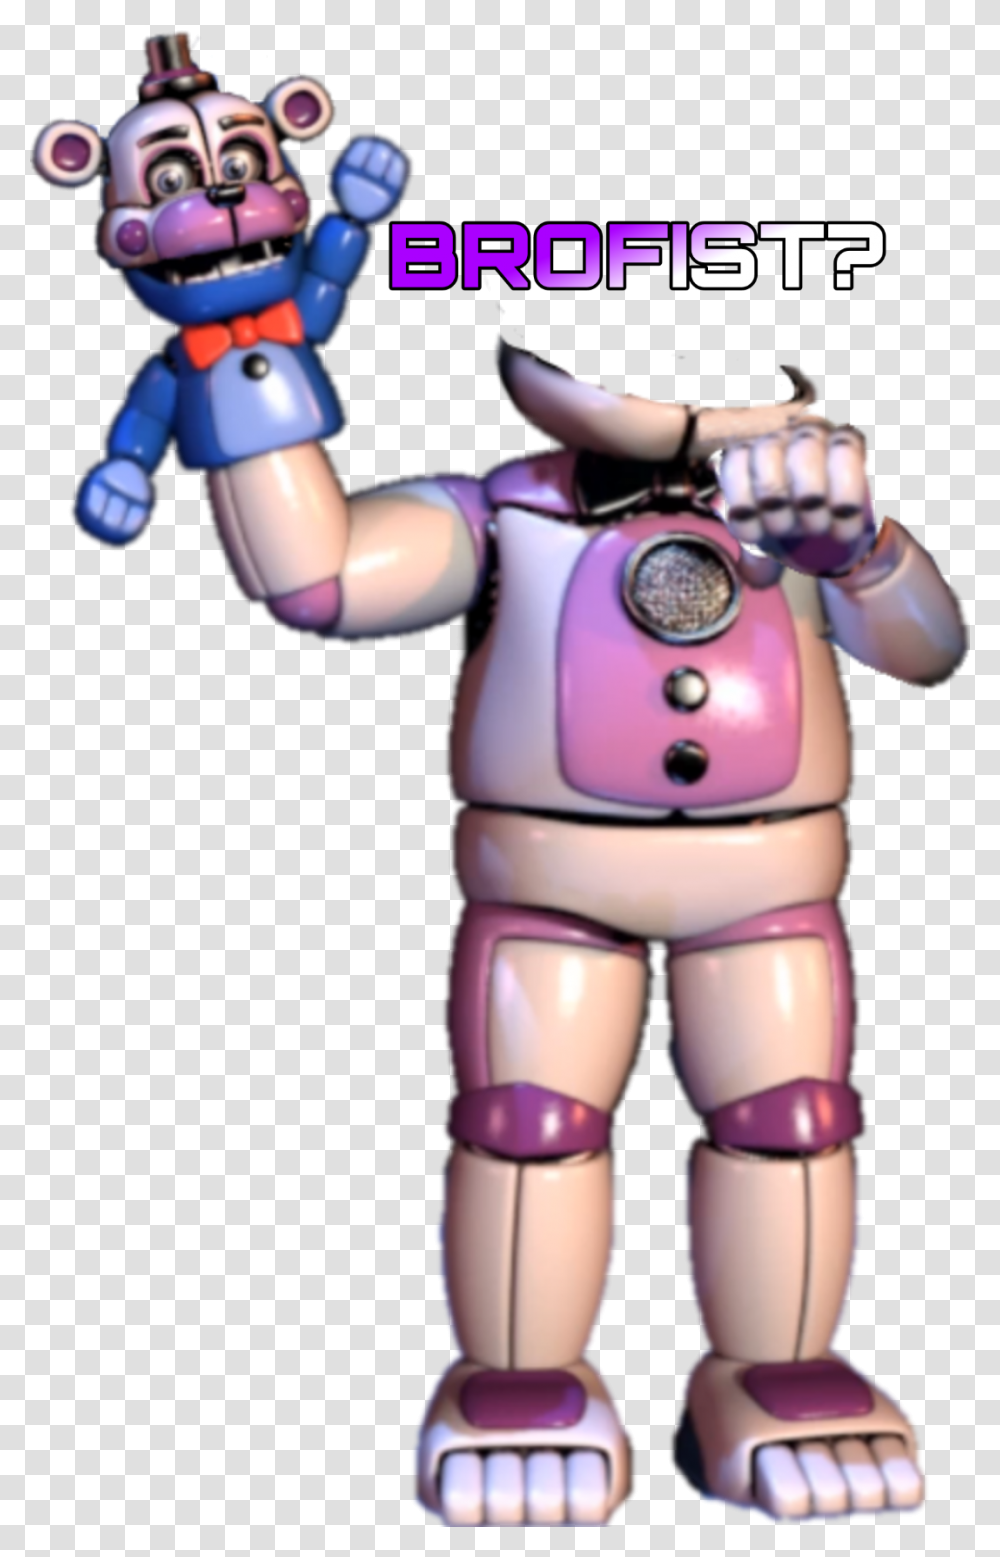 Fnafsisterlocation Pewdiepie Brofist Funtime Freddy Full Body, Robot, Figurine, Toy, Person Transparent Png